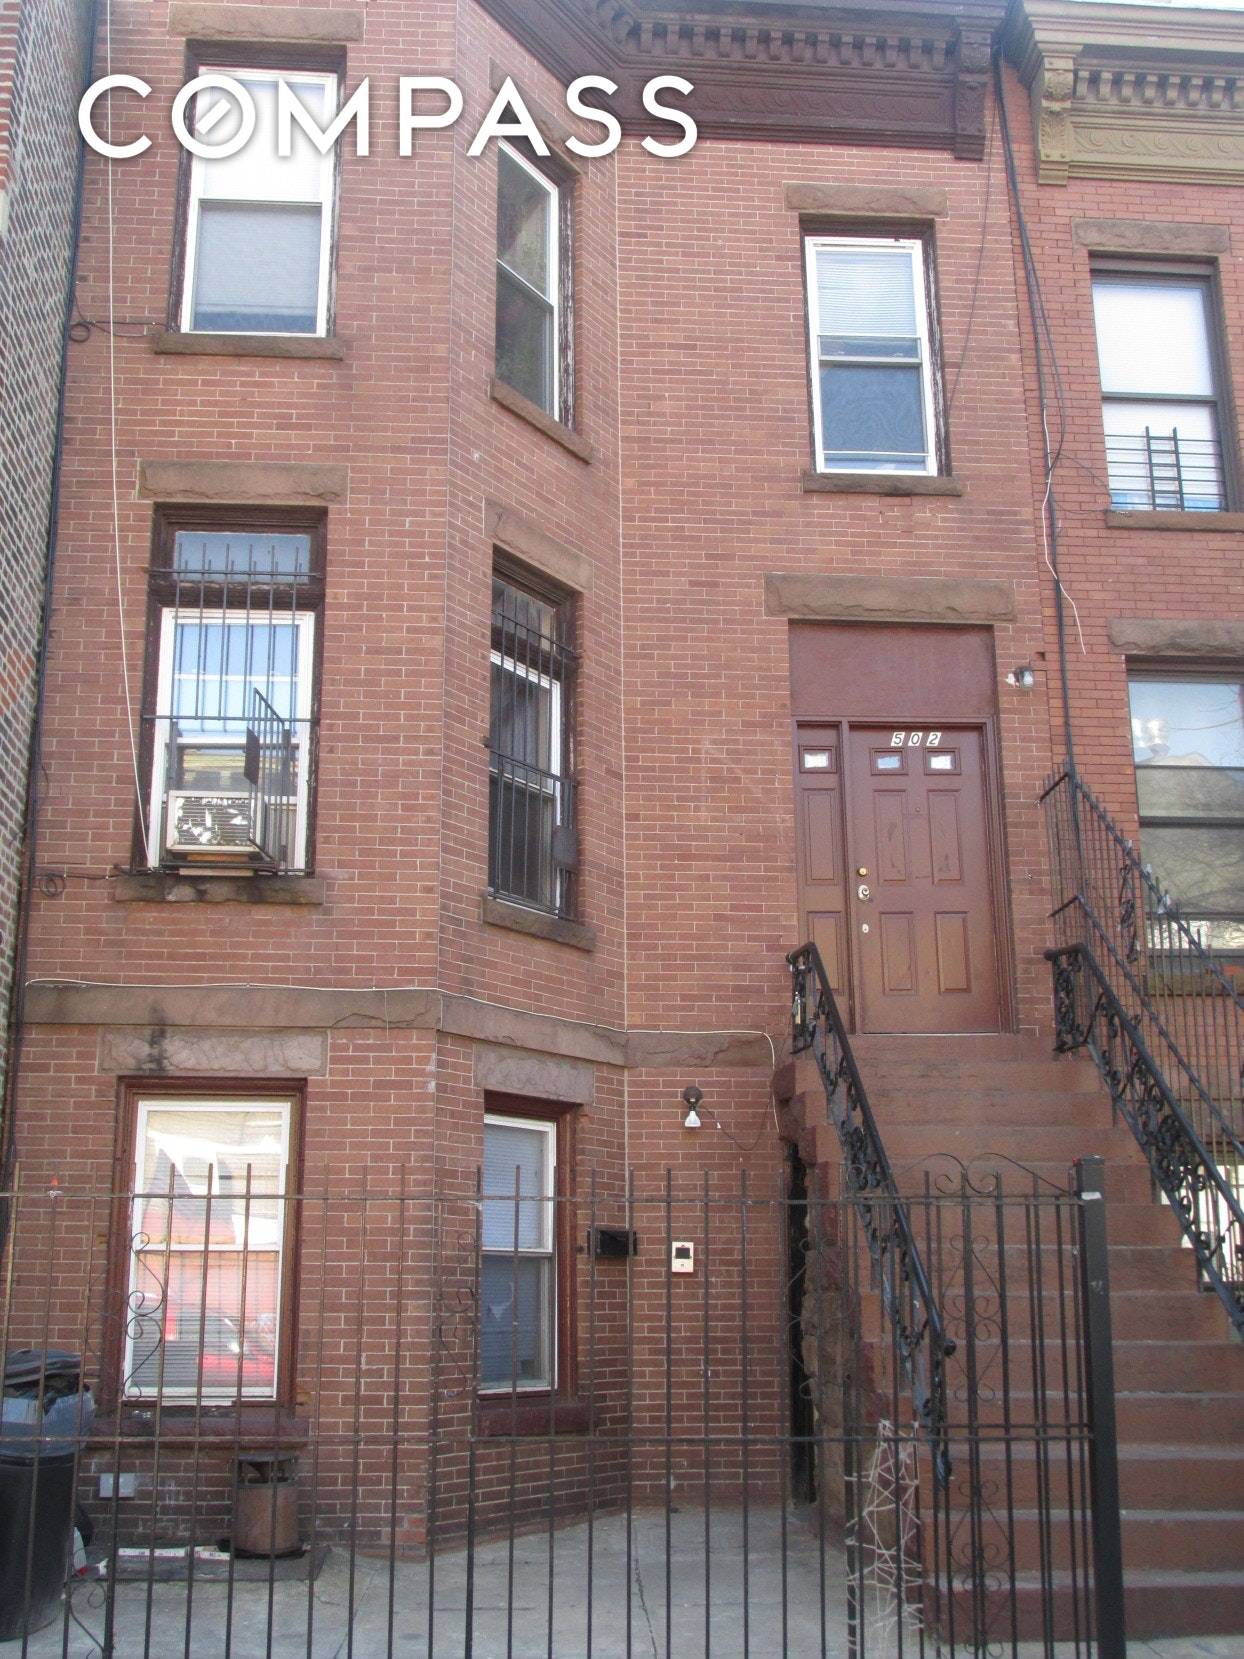 Bedford Stuyvesant Three Family home housing 2 bedroom apt units on each floor, with full basement located conveniently close to J, Z and A Train.